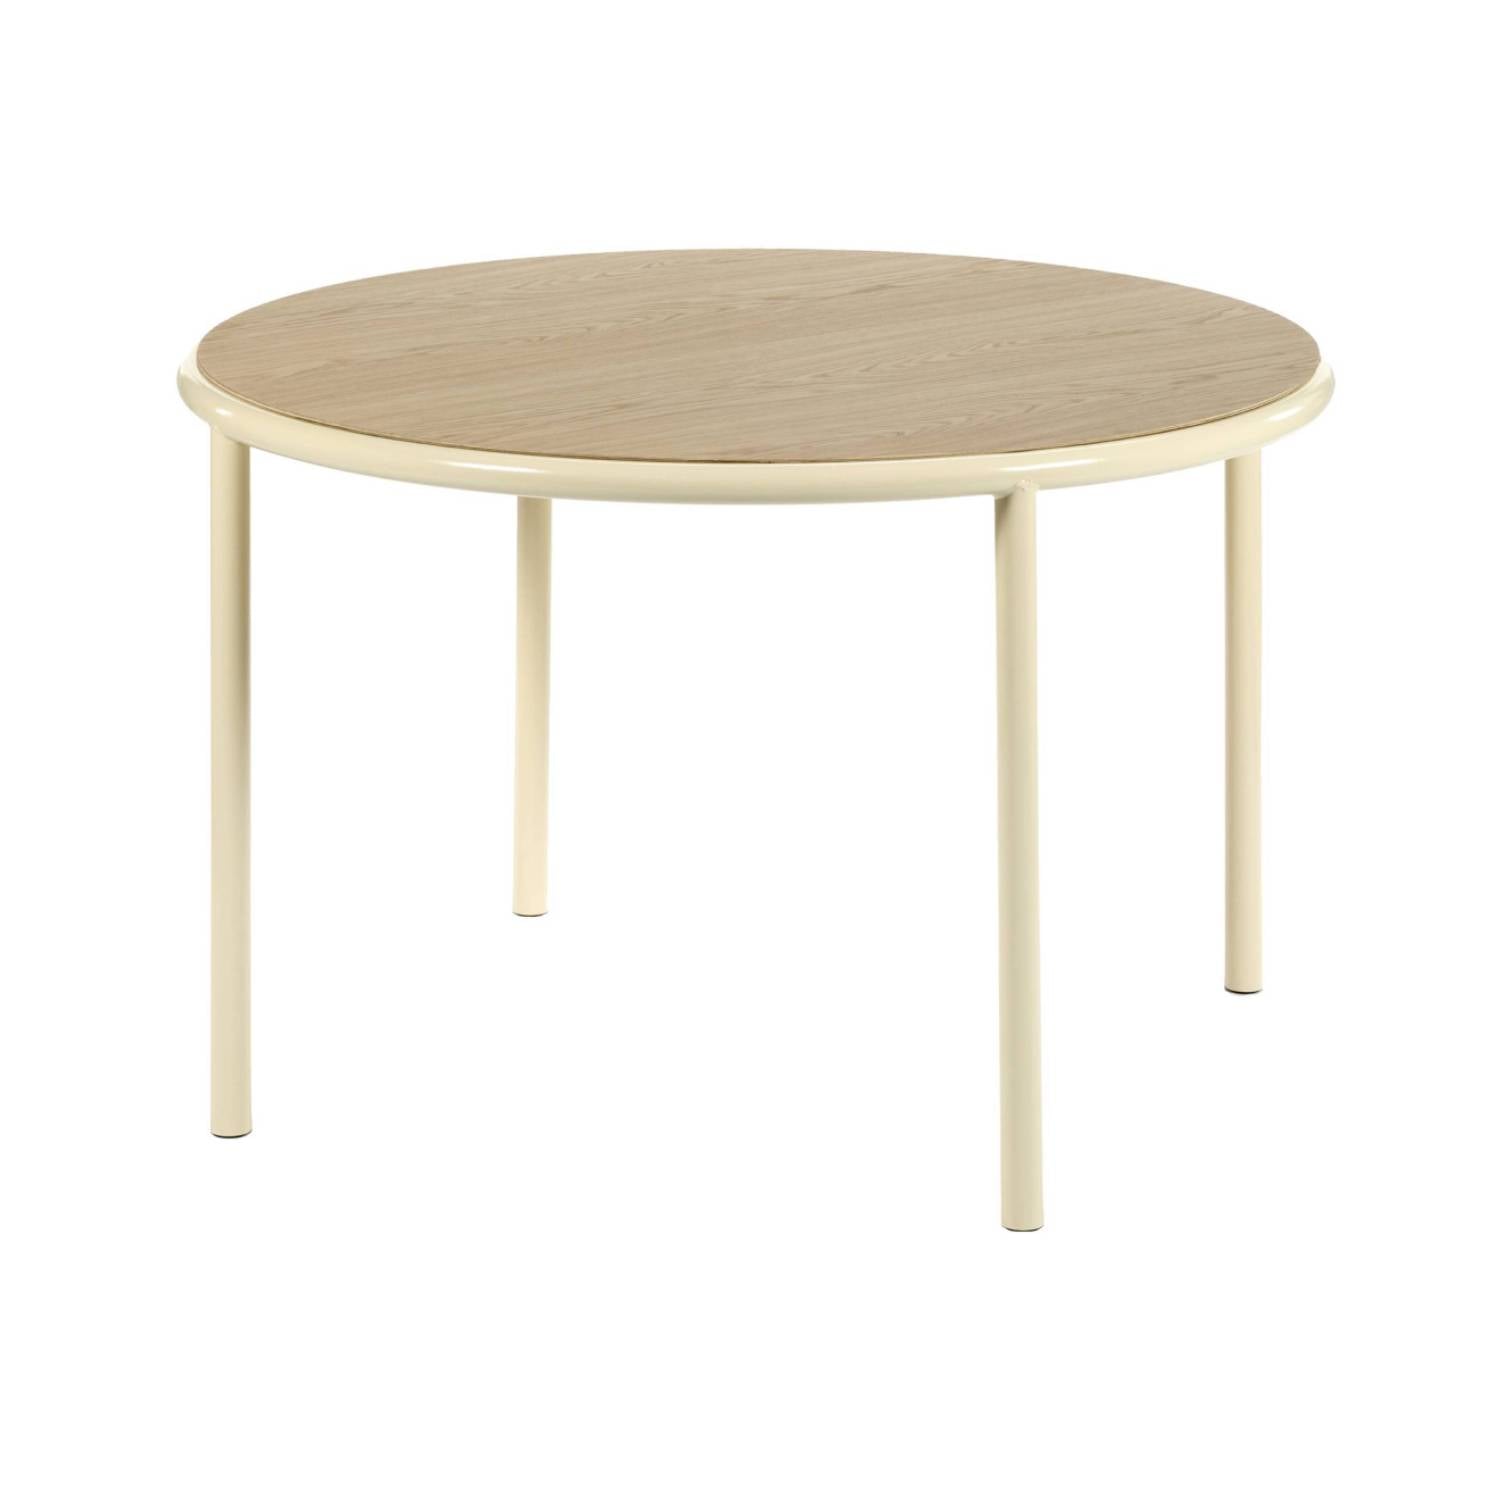 Wooden Table Round: Small - 47.2